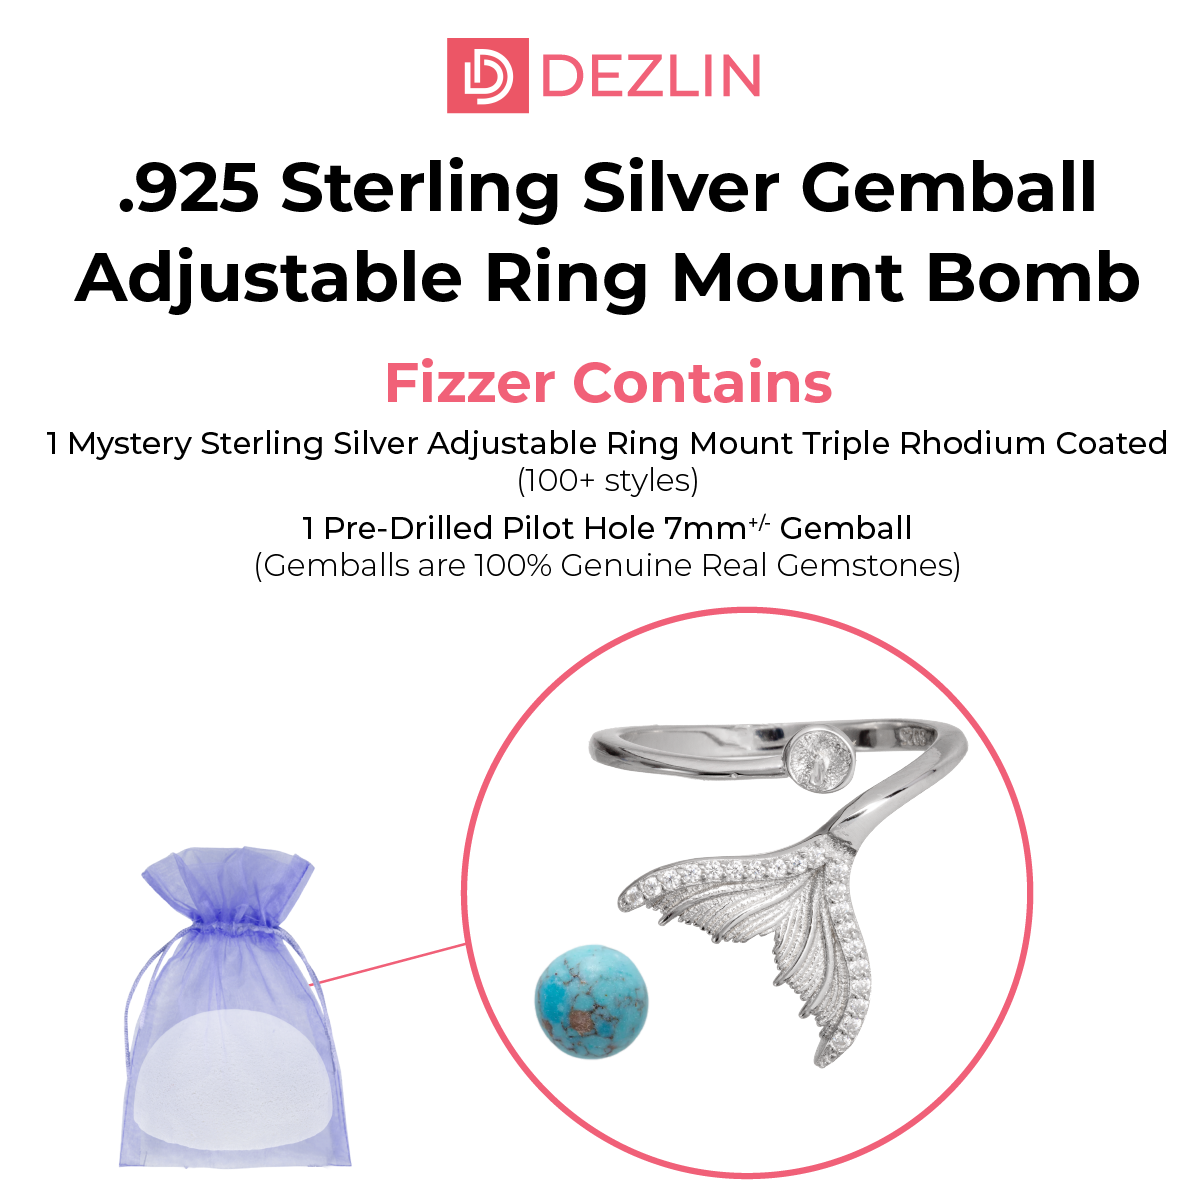 Gemball Bomb Adjustable Ring Mount Sterling Silver with Rhodium Coating